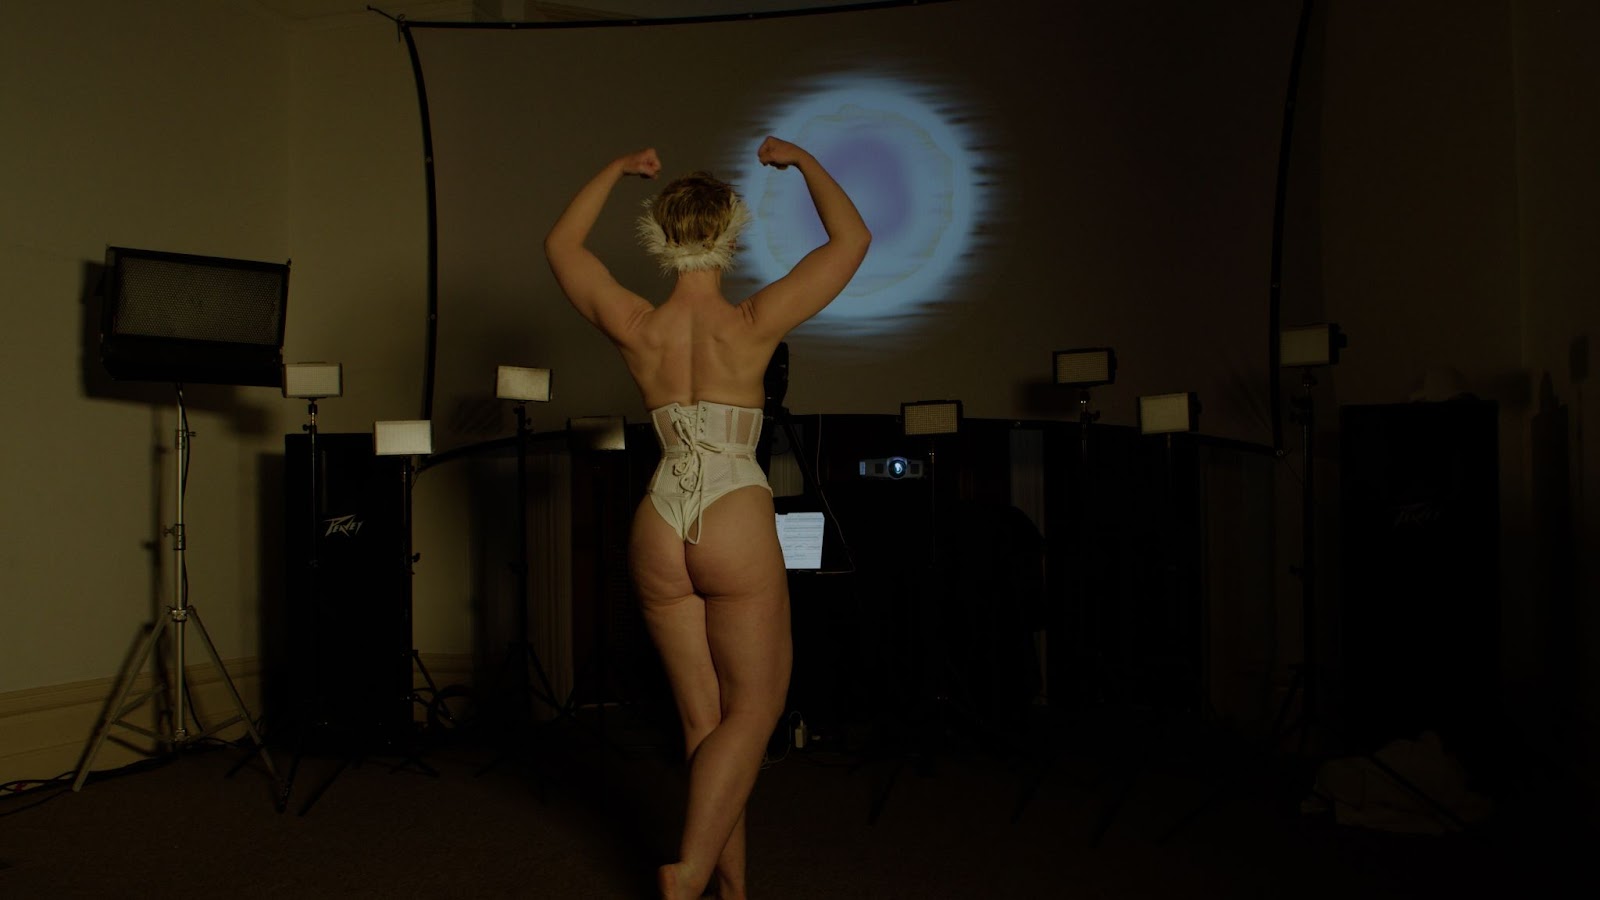 Image: Bun Stout performs “The Swan” at PS1 Close House. A performer wearing a white corset and underwear poses in front of a projector screen with their back turned toward the camera. Their arms are lifted above their head and are flexing, displaying the rippled muscles of their back. A line of unlit lights is arranged in front of the projector screen. A luminous sphere is displayed on the projector screen. Photo courtesy of the artist. 